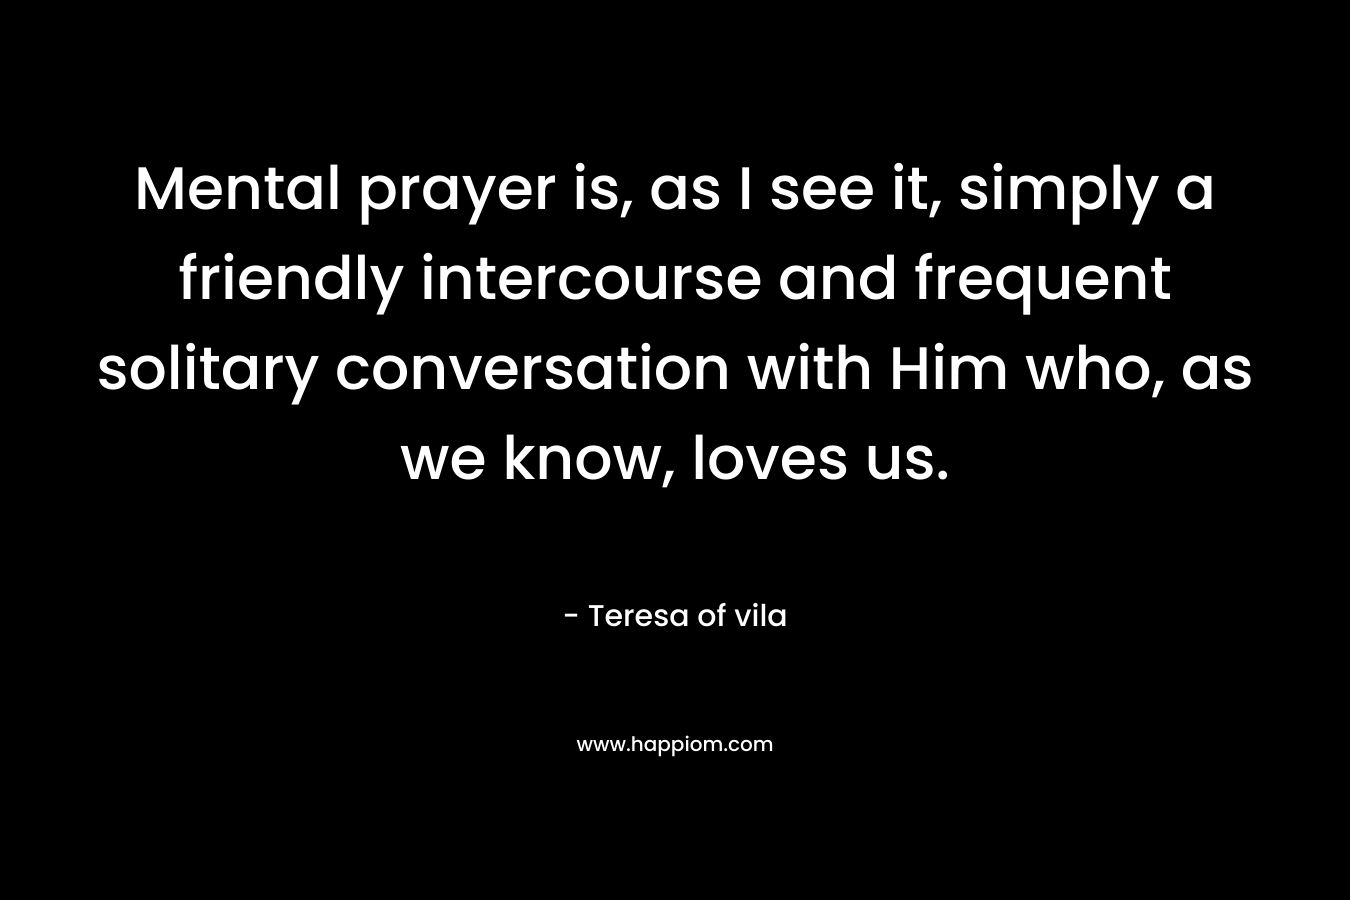 Mental prayer is, as I see it, simply a friendly intercourse and frequent solitary conversation with Him who, as we know, loves us. – Teresa of vila